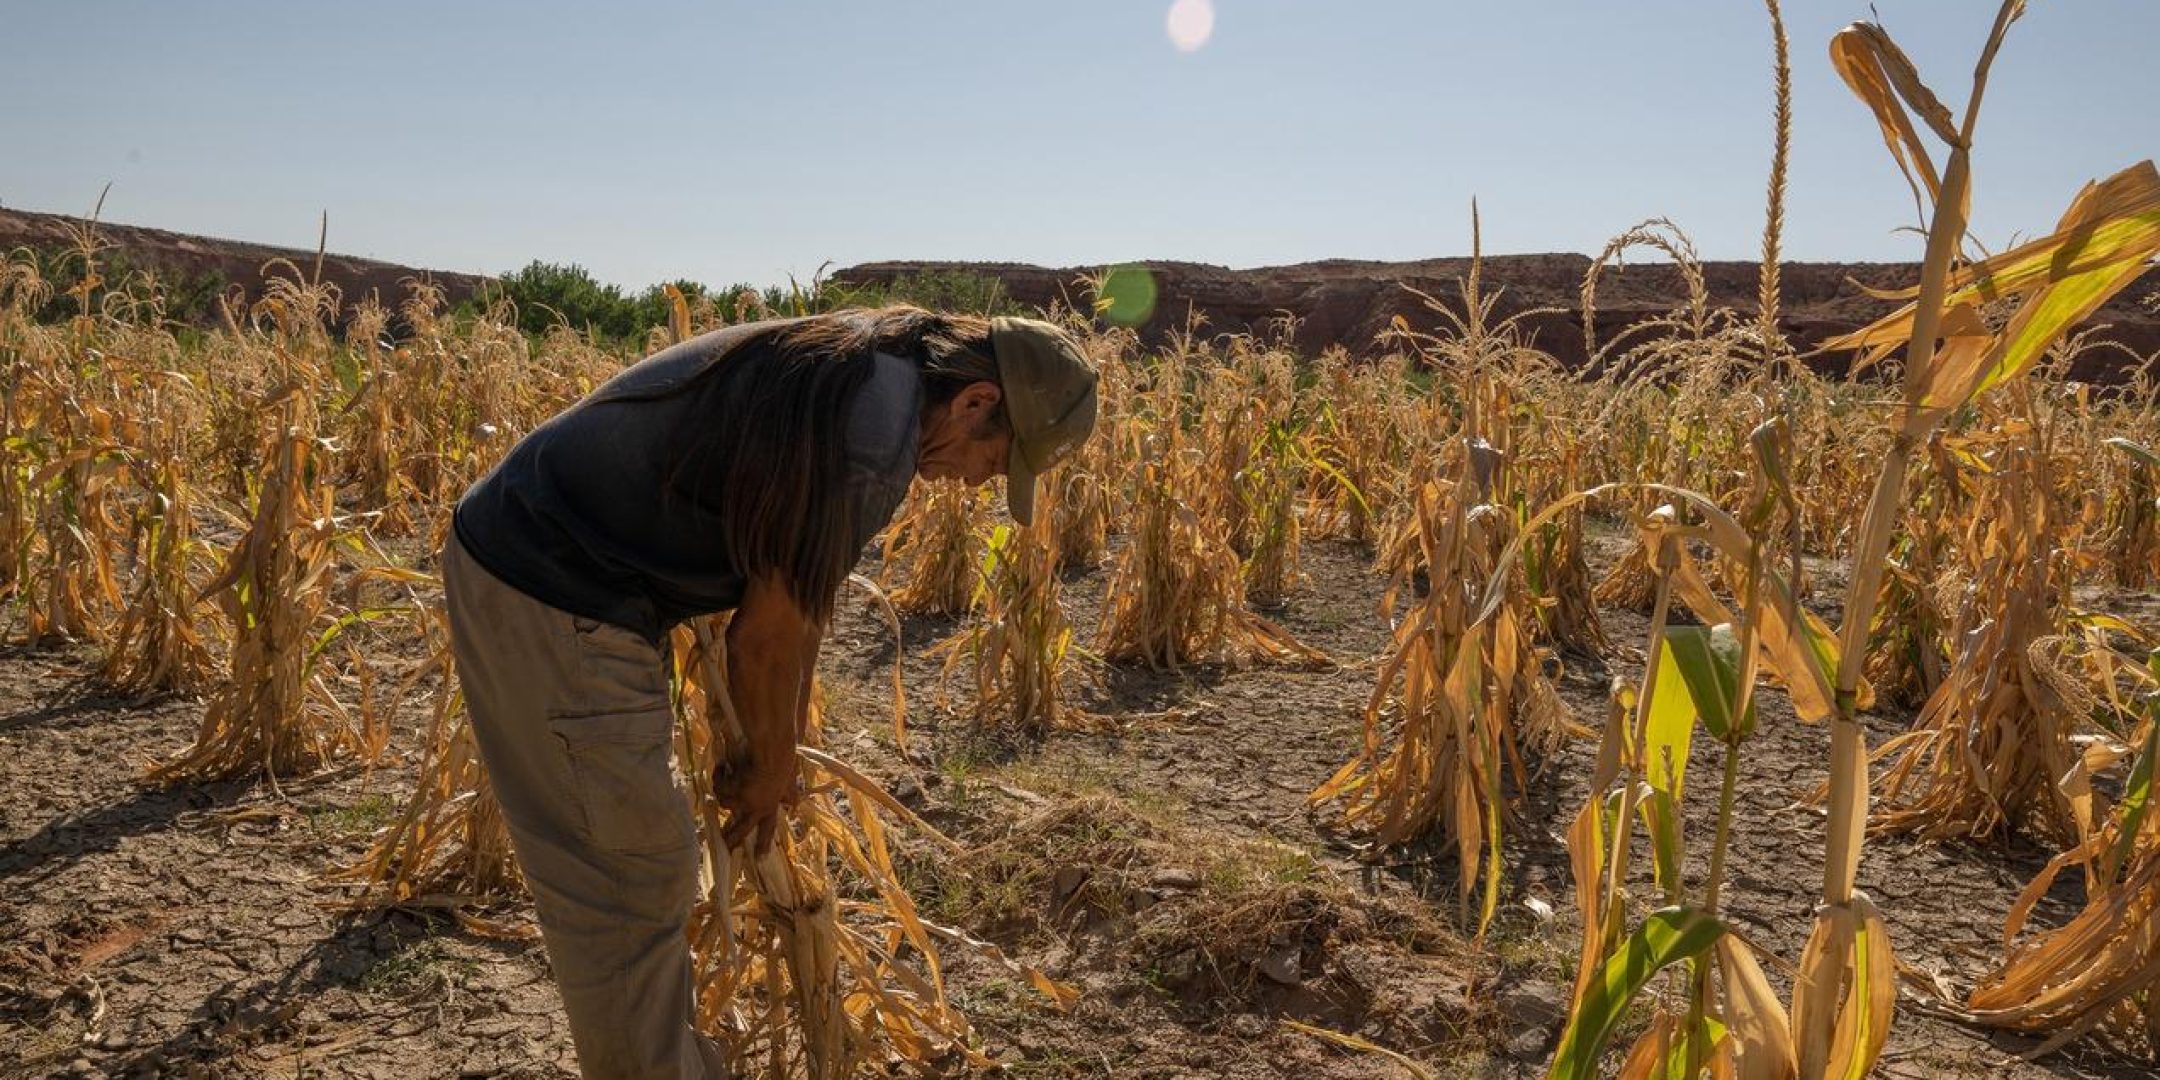 Curtis Naseyowma tends to corn crops in Lower Moenkopi Village, Ariz., on the Hopi Reservation, Sept. 20, 2021.  The Hopi tribe has survived for more than a thousand years in the arid mesas. The megadrought gripping the Southwest is testing that resilience. (Tom·s Karmelo Amaya/The New York Times)